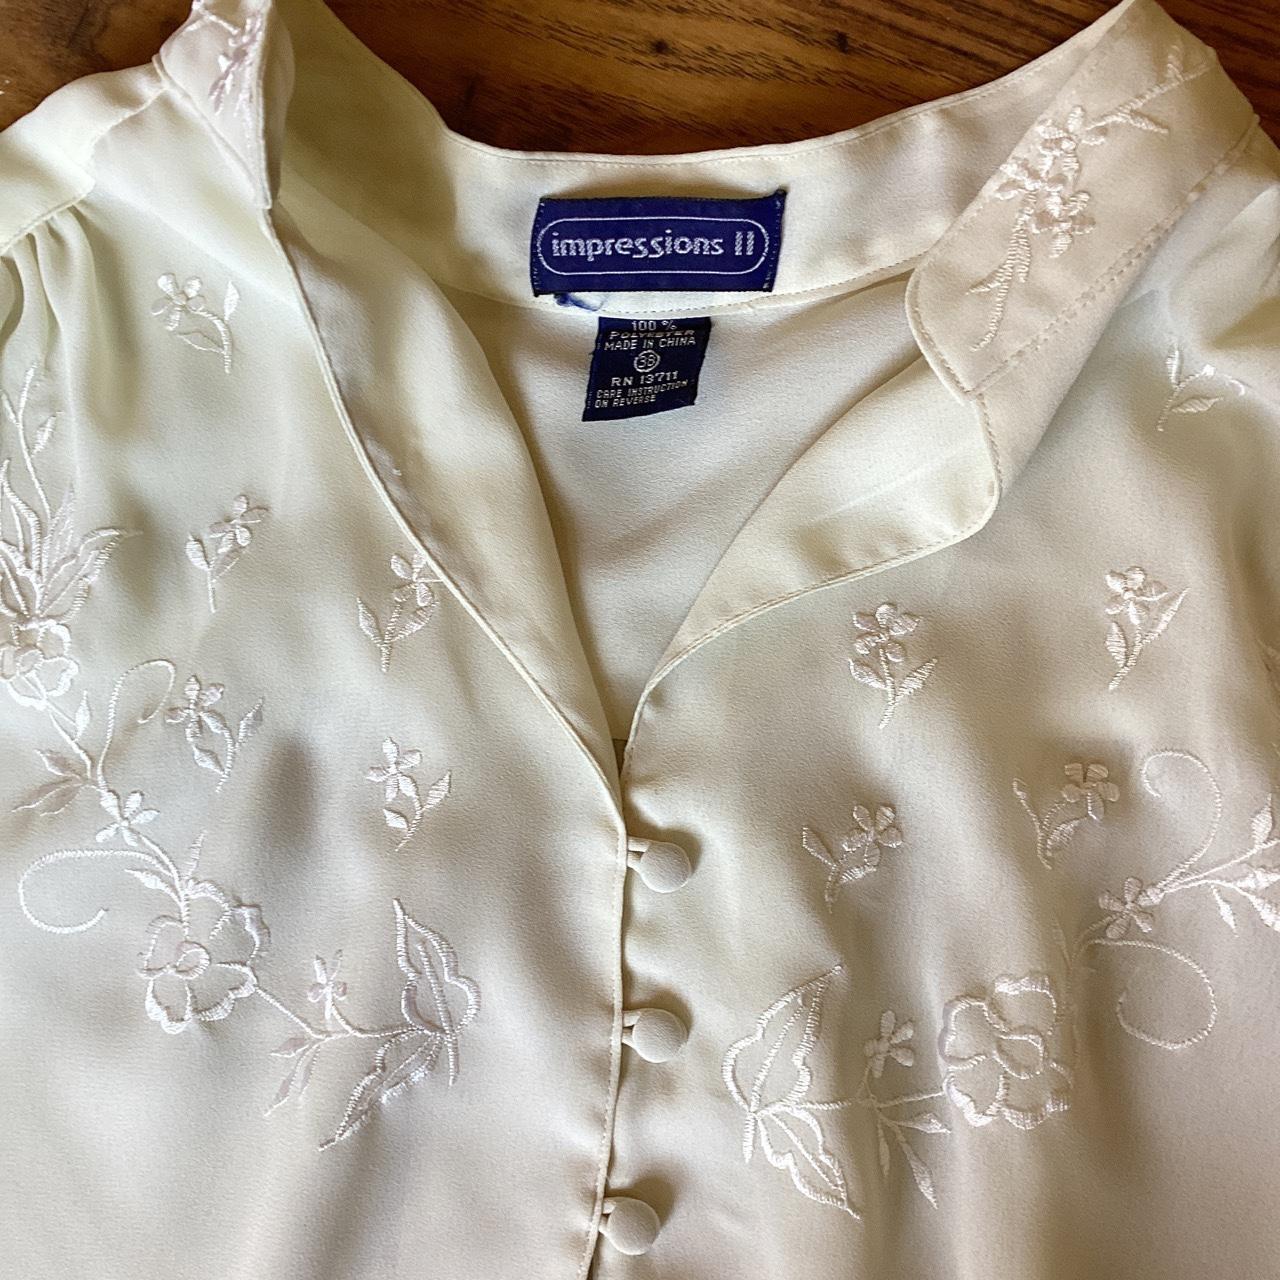 Impressions Women's Cream and White Blouse